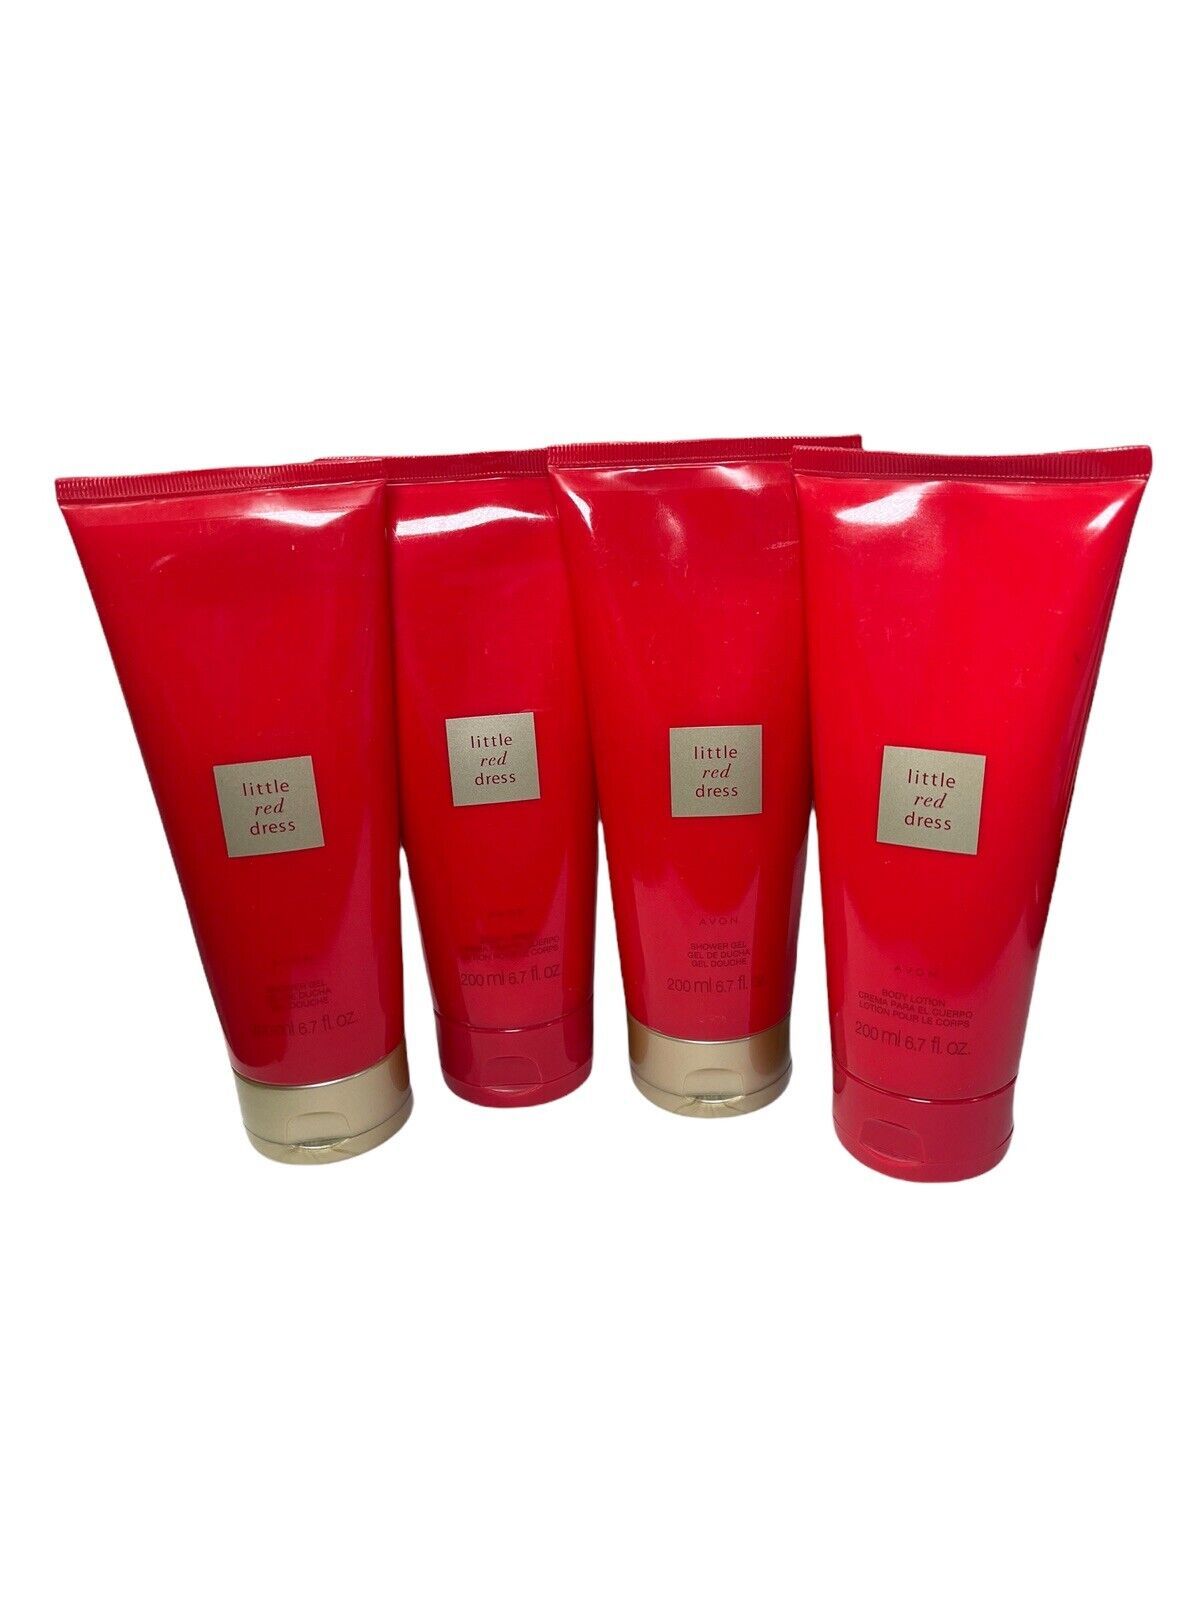 Primary image for Avon LITTLE RED DRESS Shower Gel & Body Lotion 6.7 fl.oz Set Of 4, 2 of ea. NEW